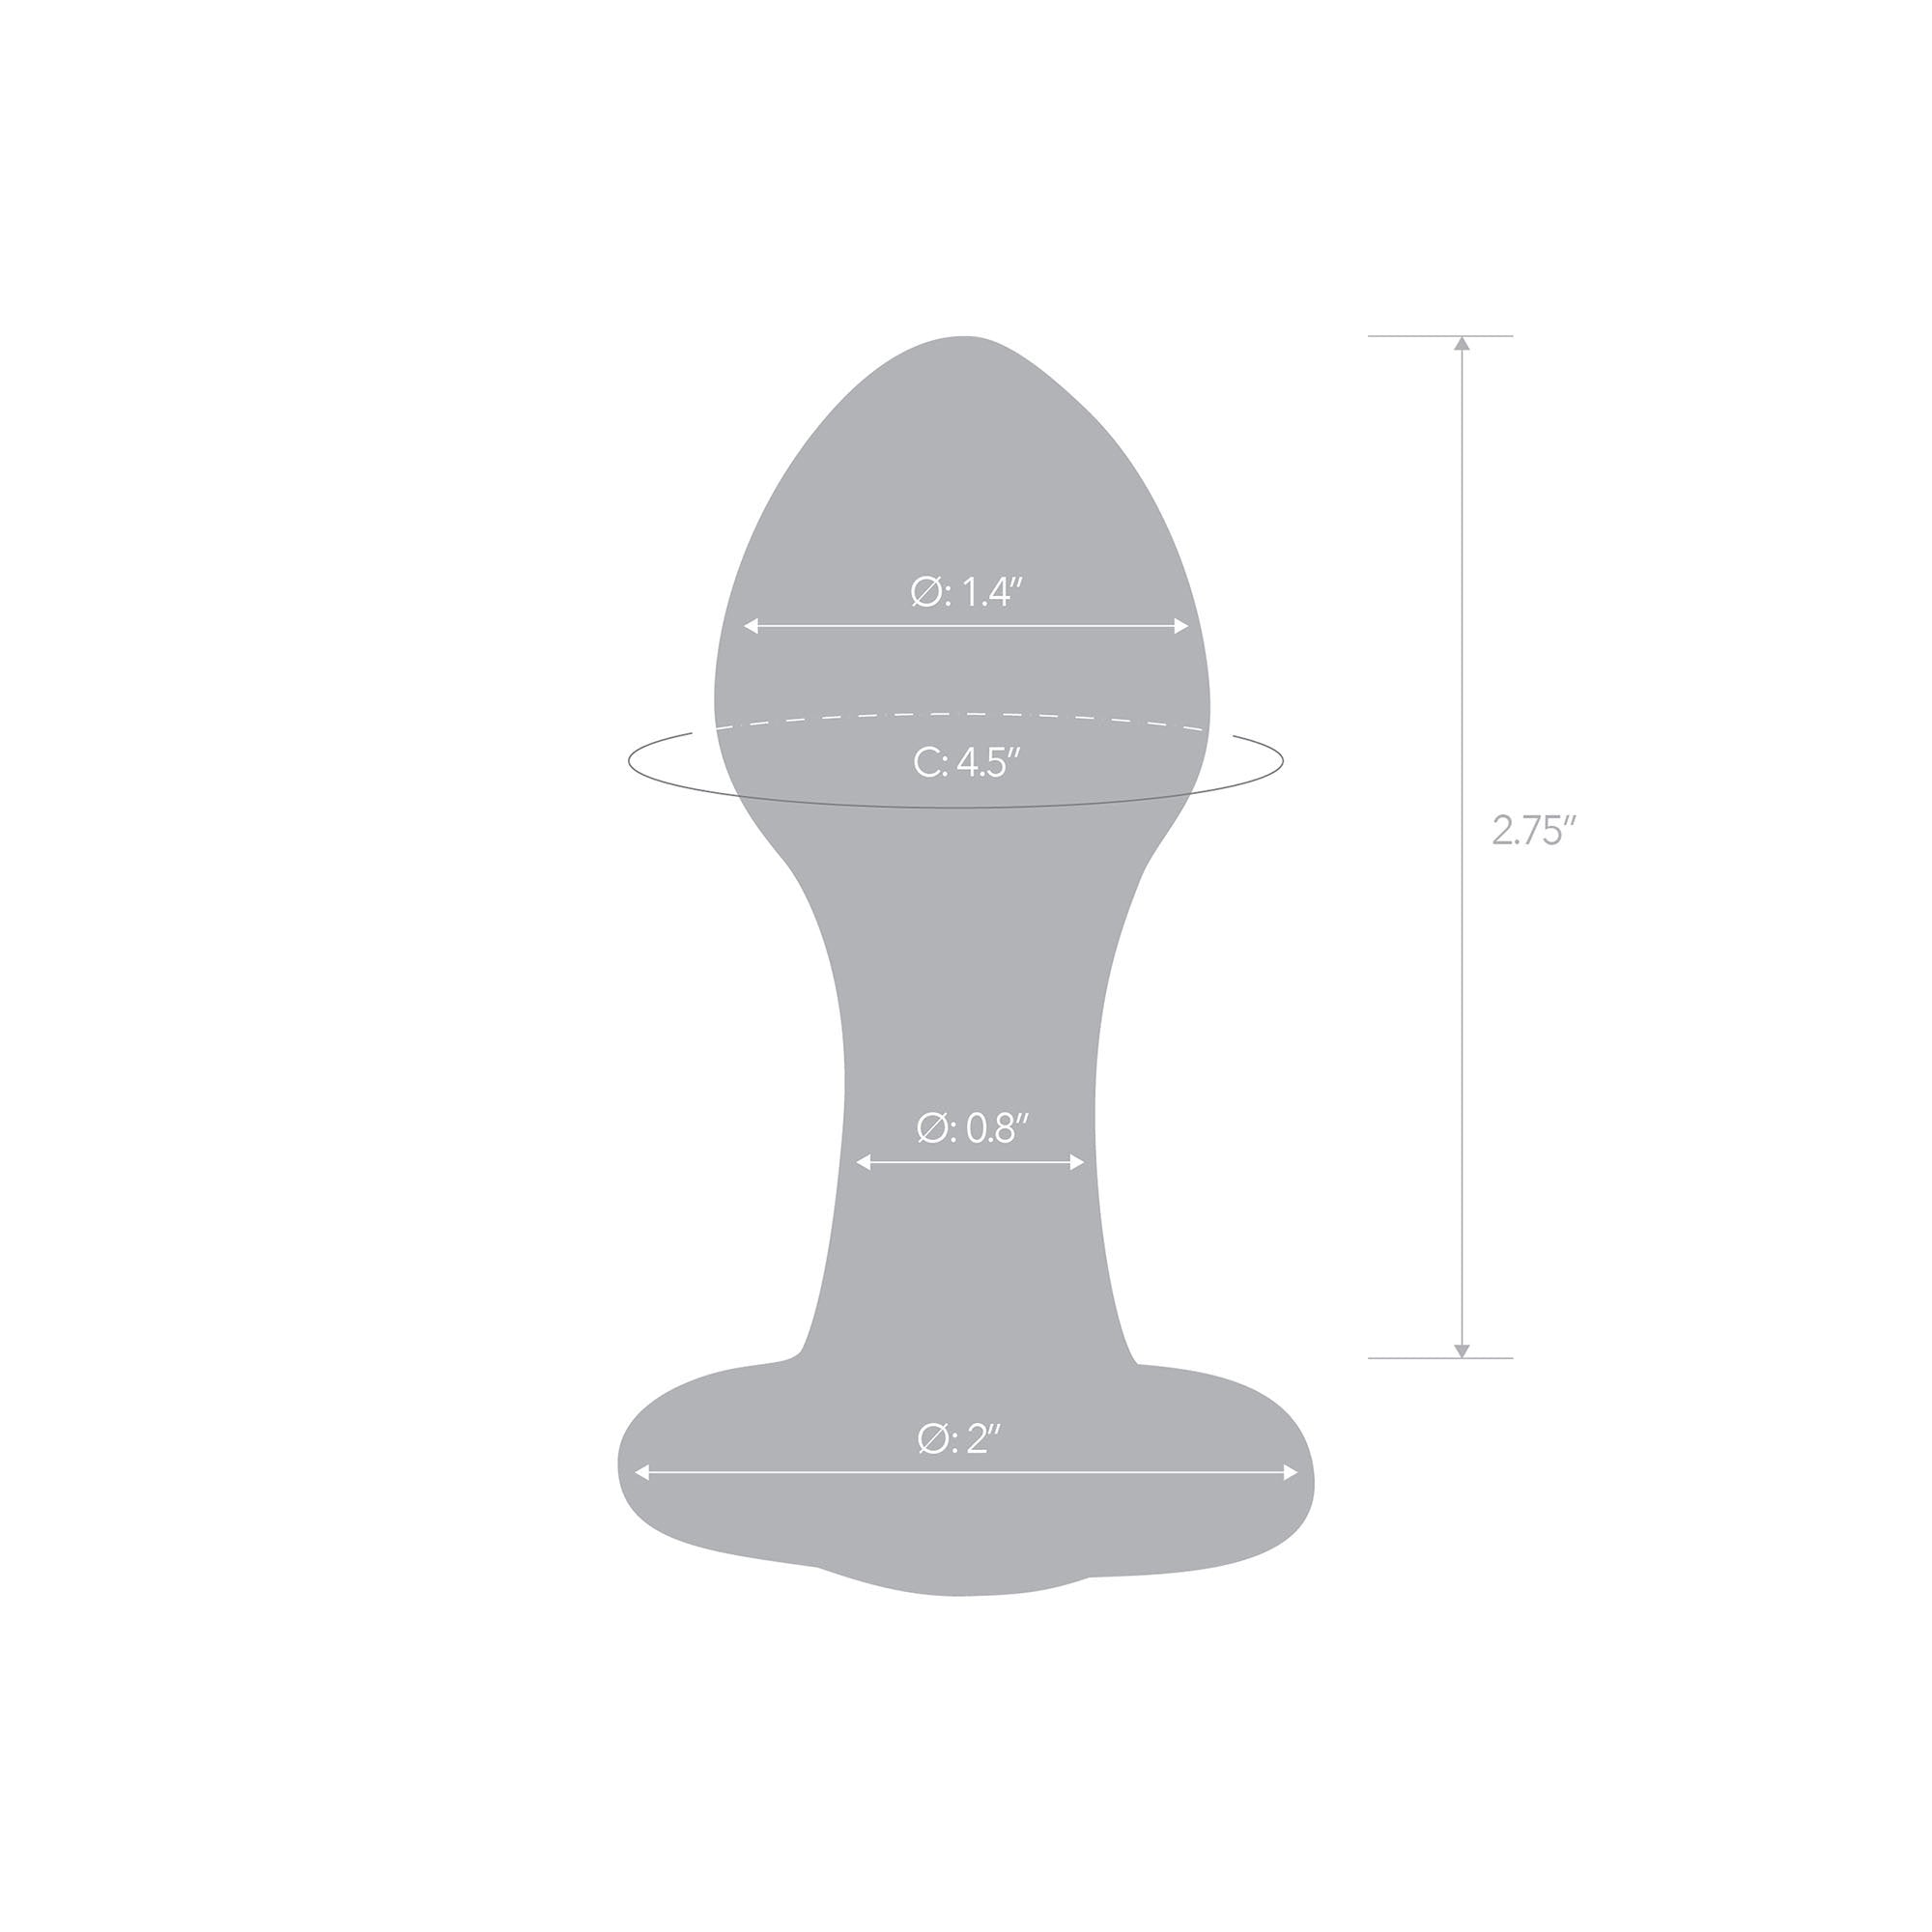 Specifications of the 3.5 inch Bling Bling Glass Butt Plug